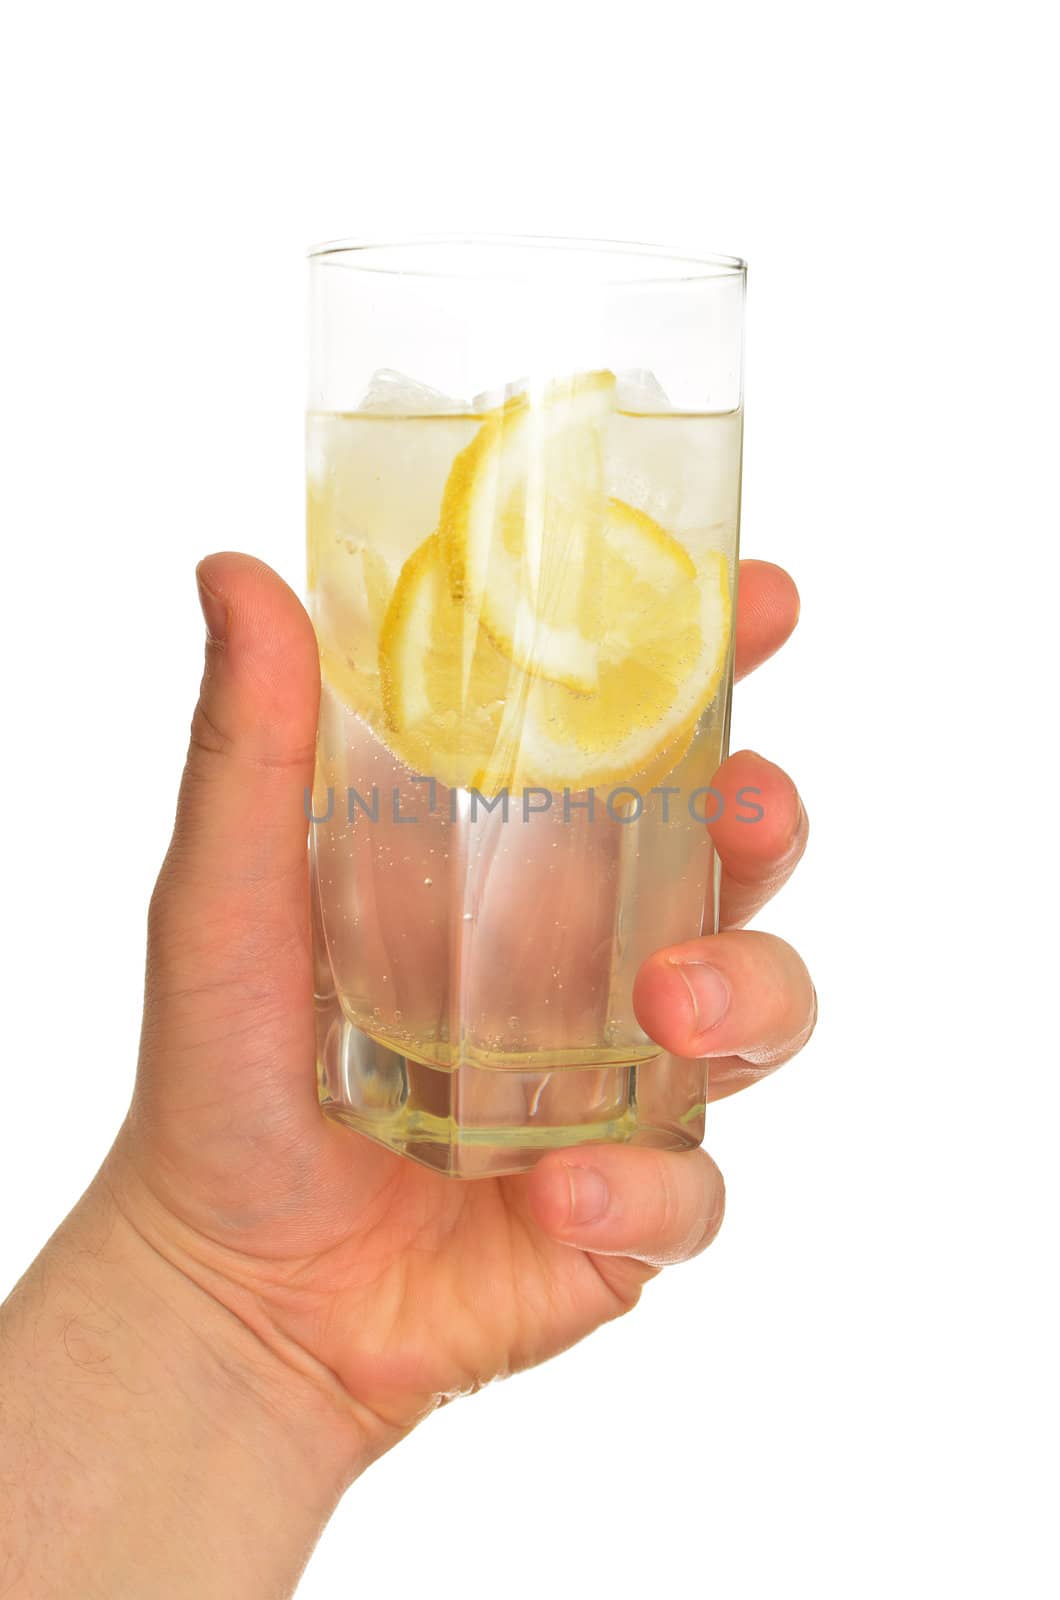 Man's hand holding glass of water with ice and lemon, isolated on white